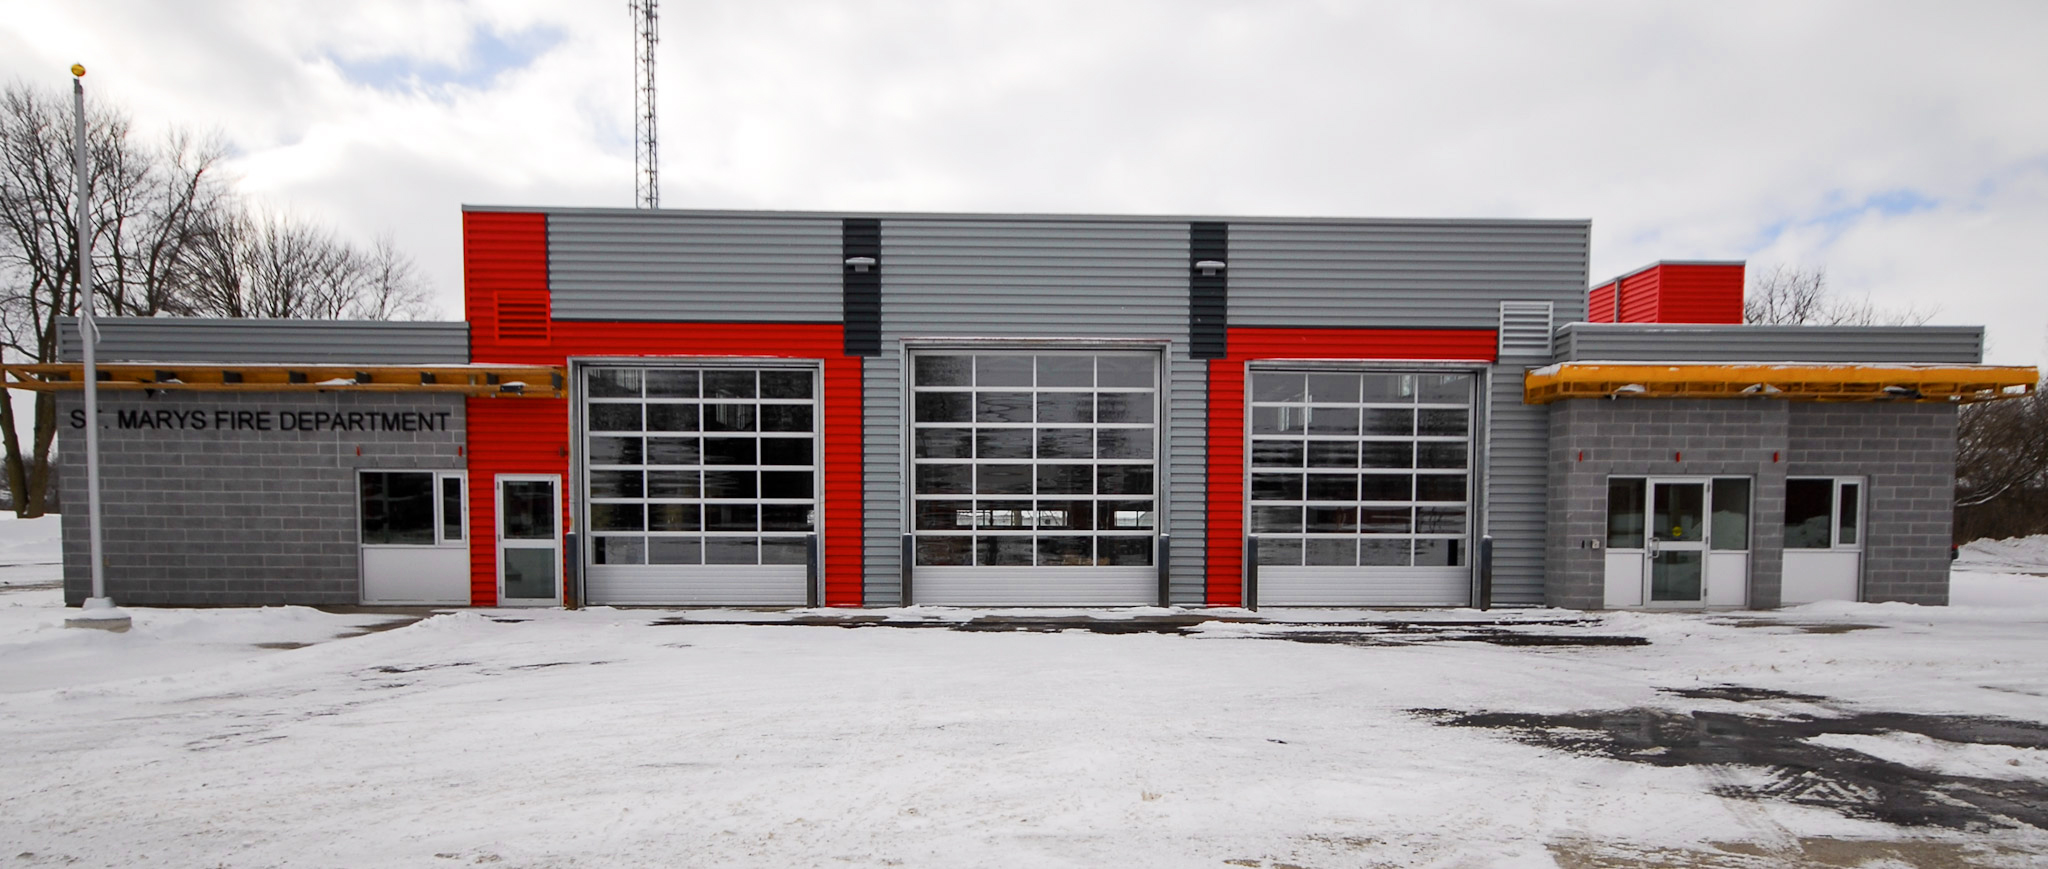 The St. Marys Fire Station is nearing completion and ready to welcome the St. Marys Fire Department.